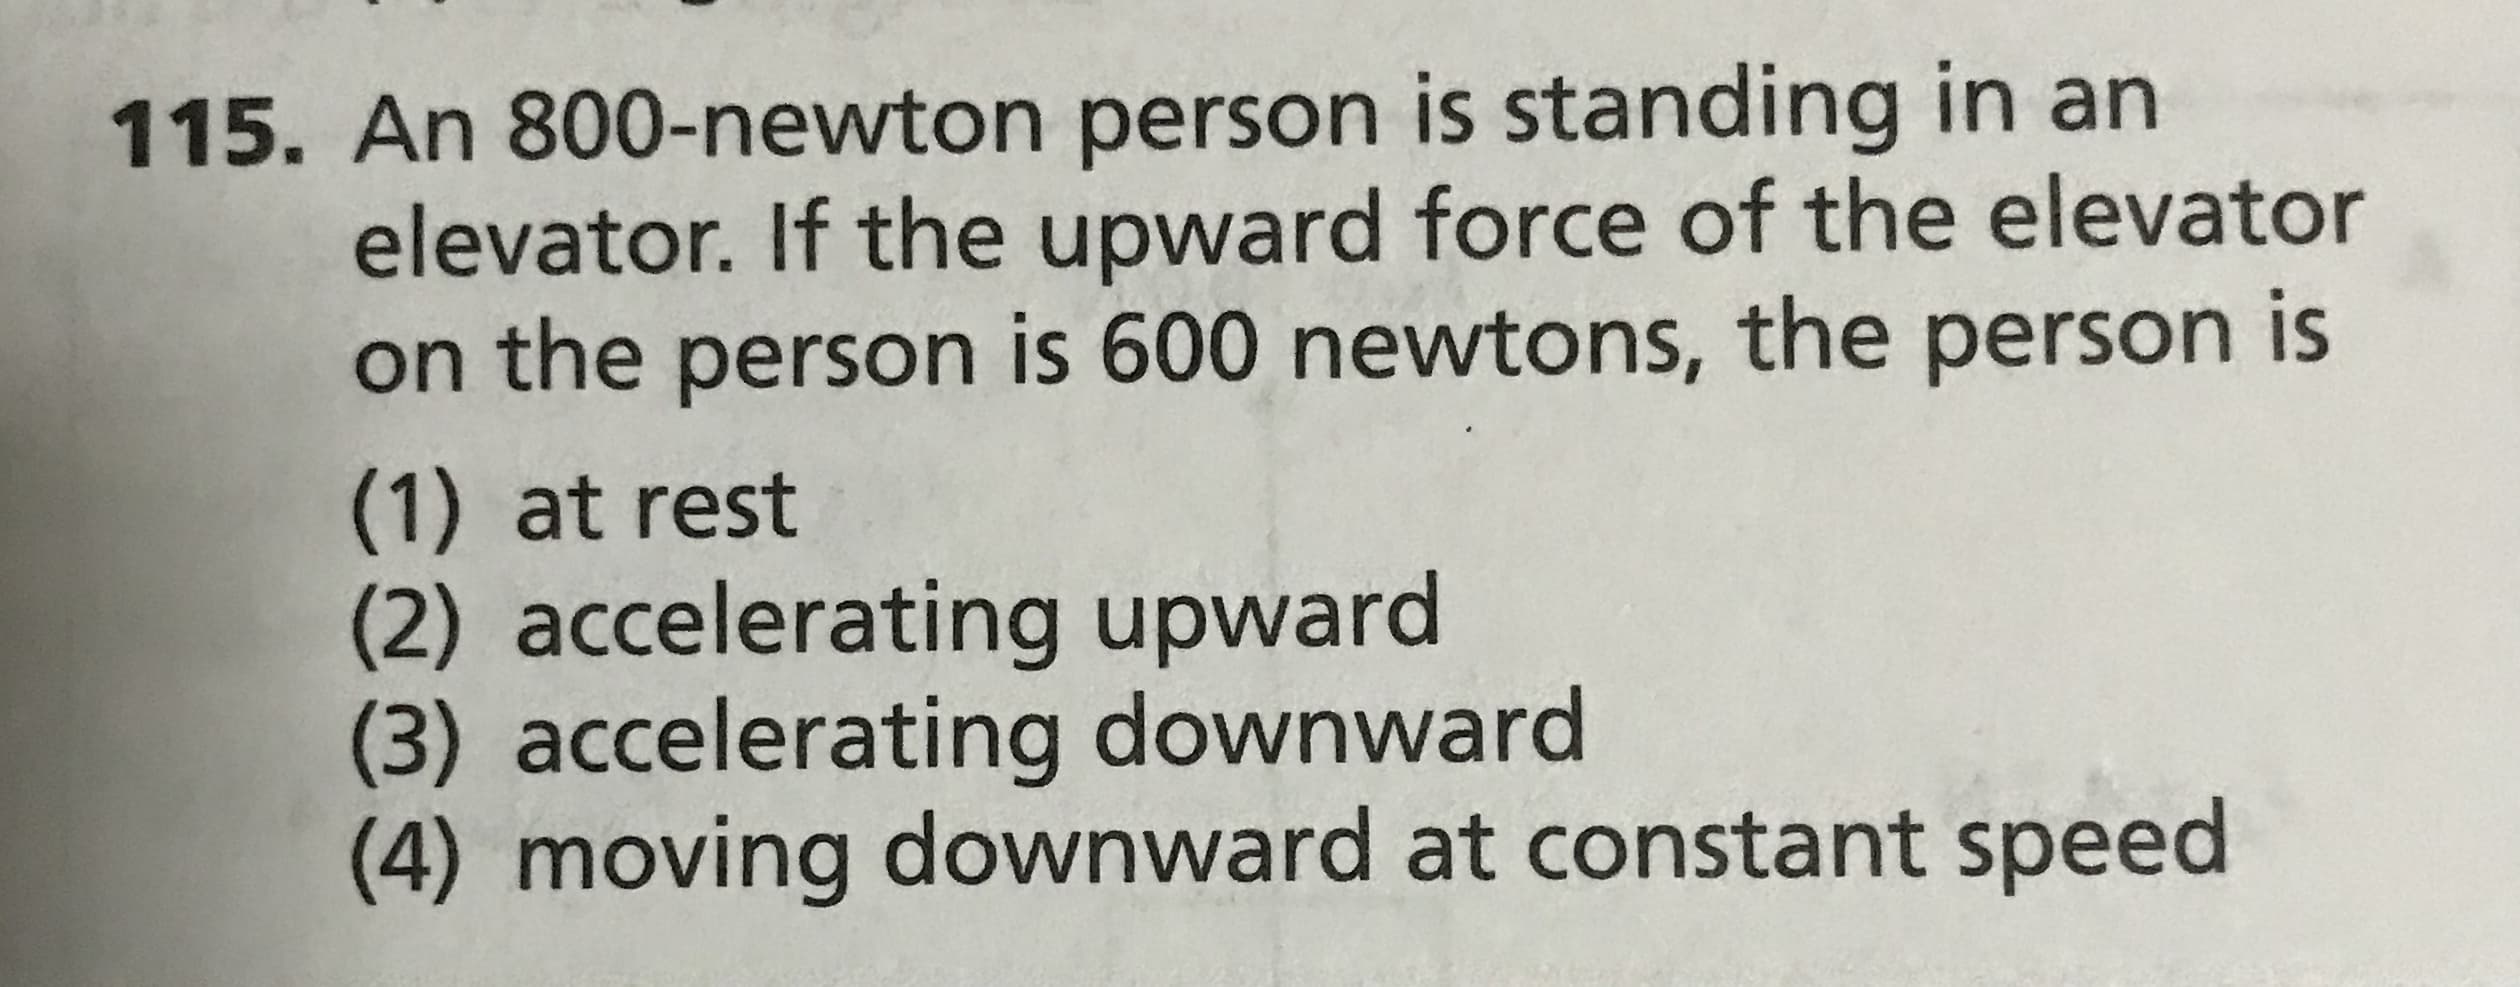 115. An 800-newton person is standing in an
elevator. If the upward force of the elevator
on the person is 600 newtons, the person is
(1) at rest
accelerating upward
(3) accelerating downward
(4) moving downward at constant speed
